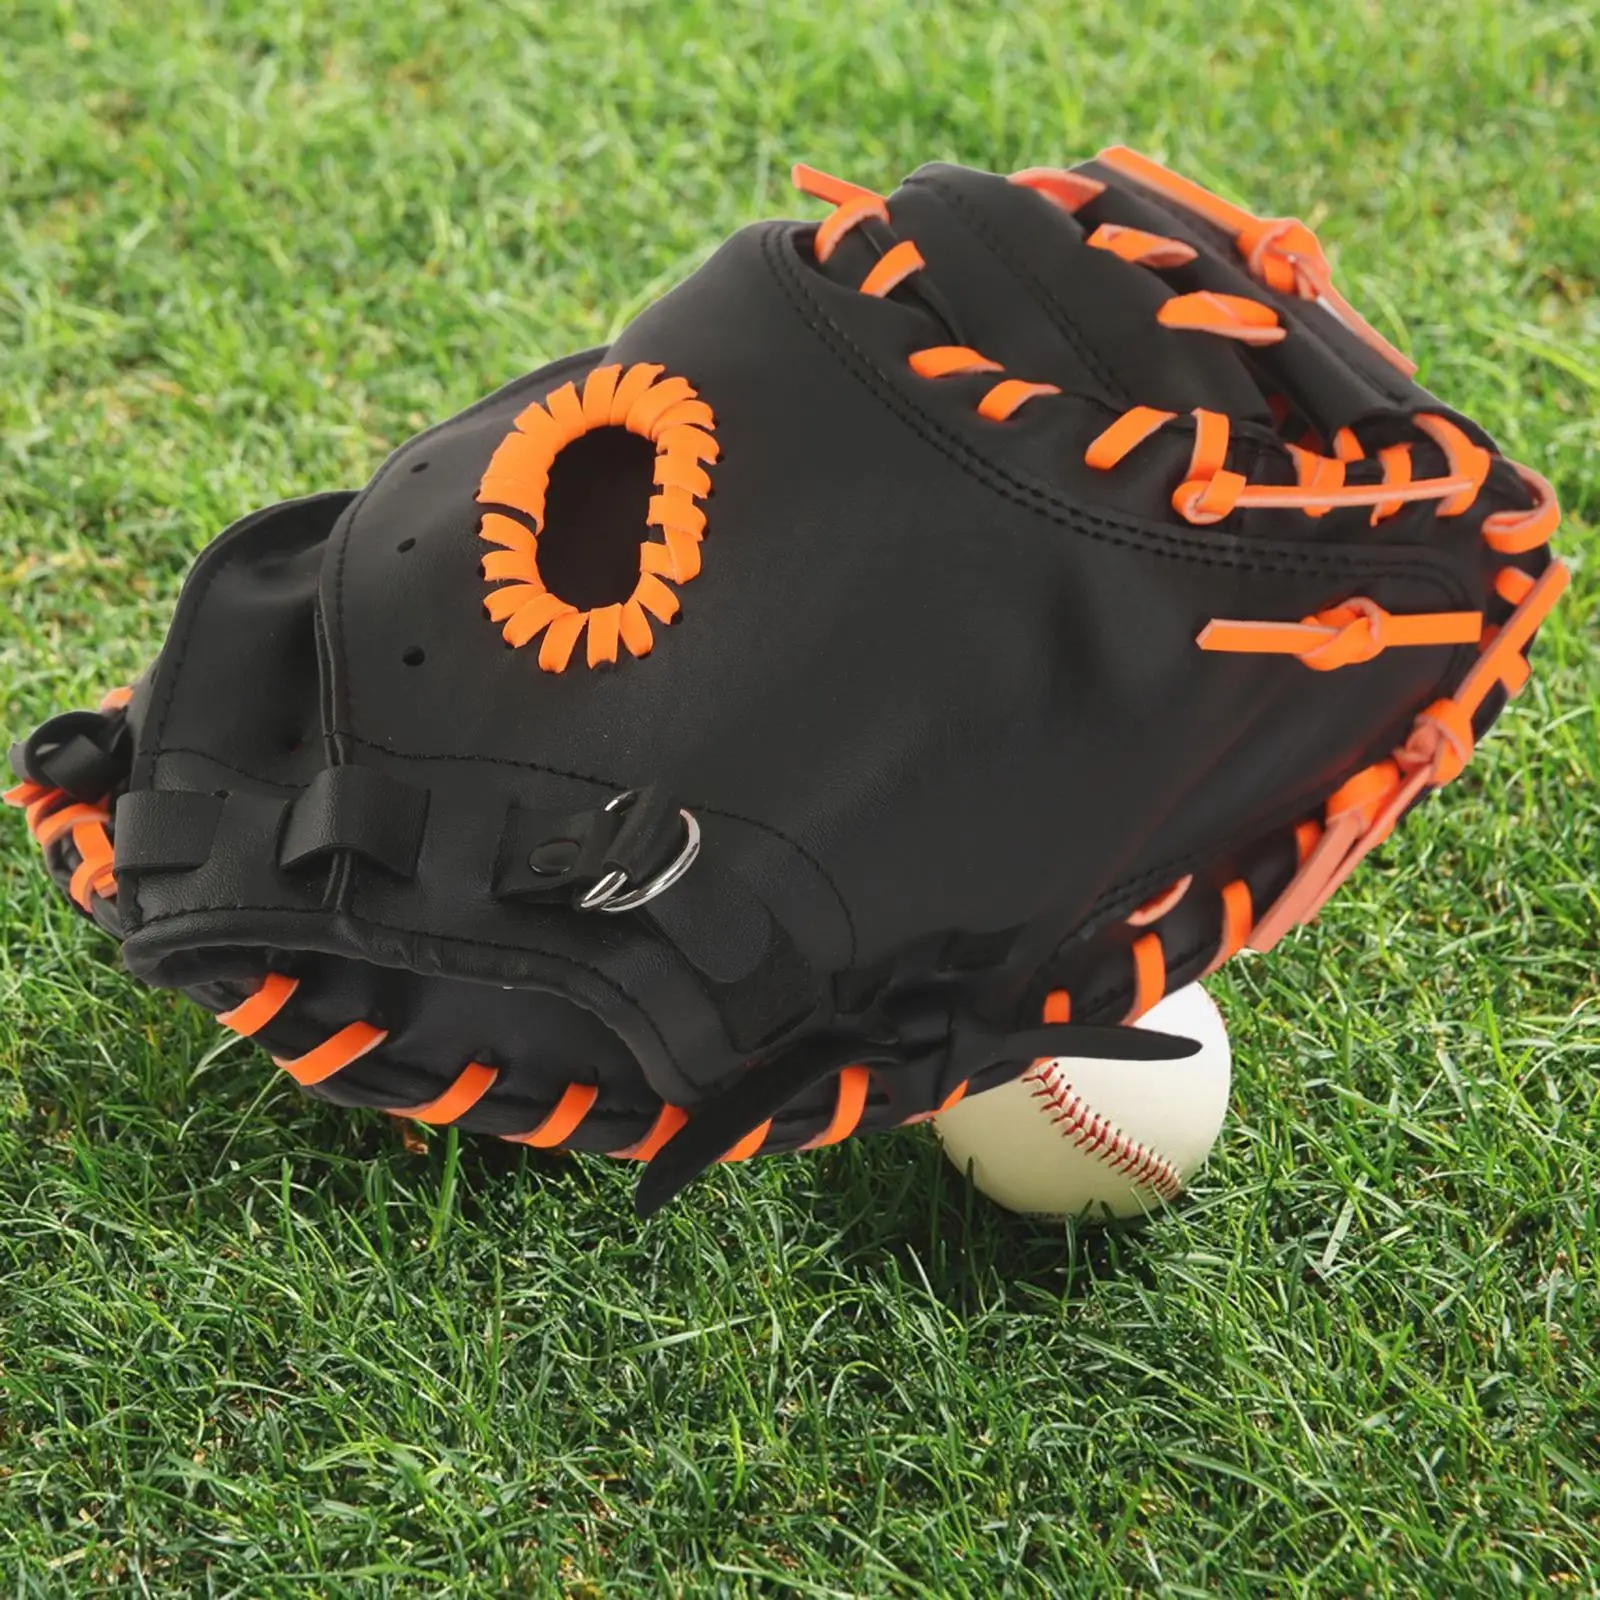 Sports Baseball Glove Right Hand Throw Baseball Fielding Glove Thicken Baseball Softball Fielding Glove for Youth Adult Practice